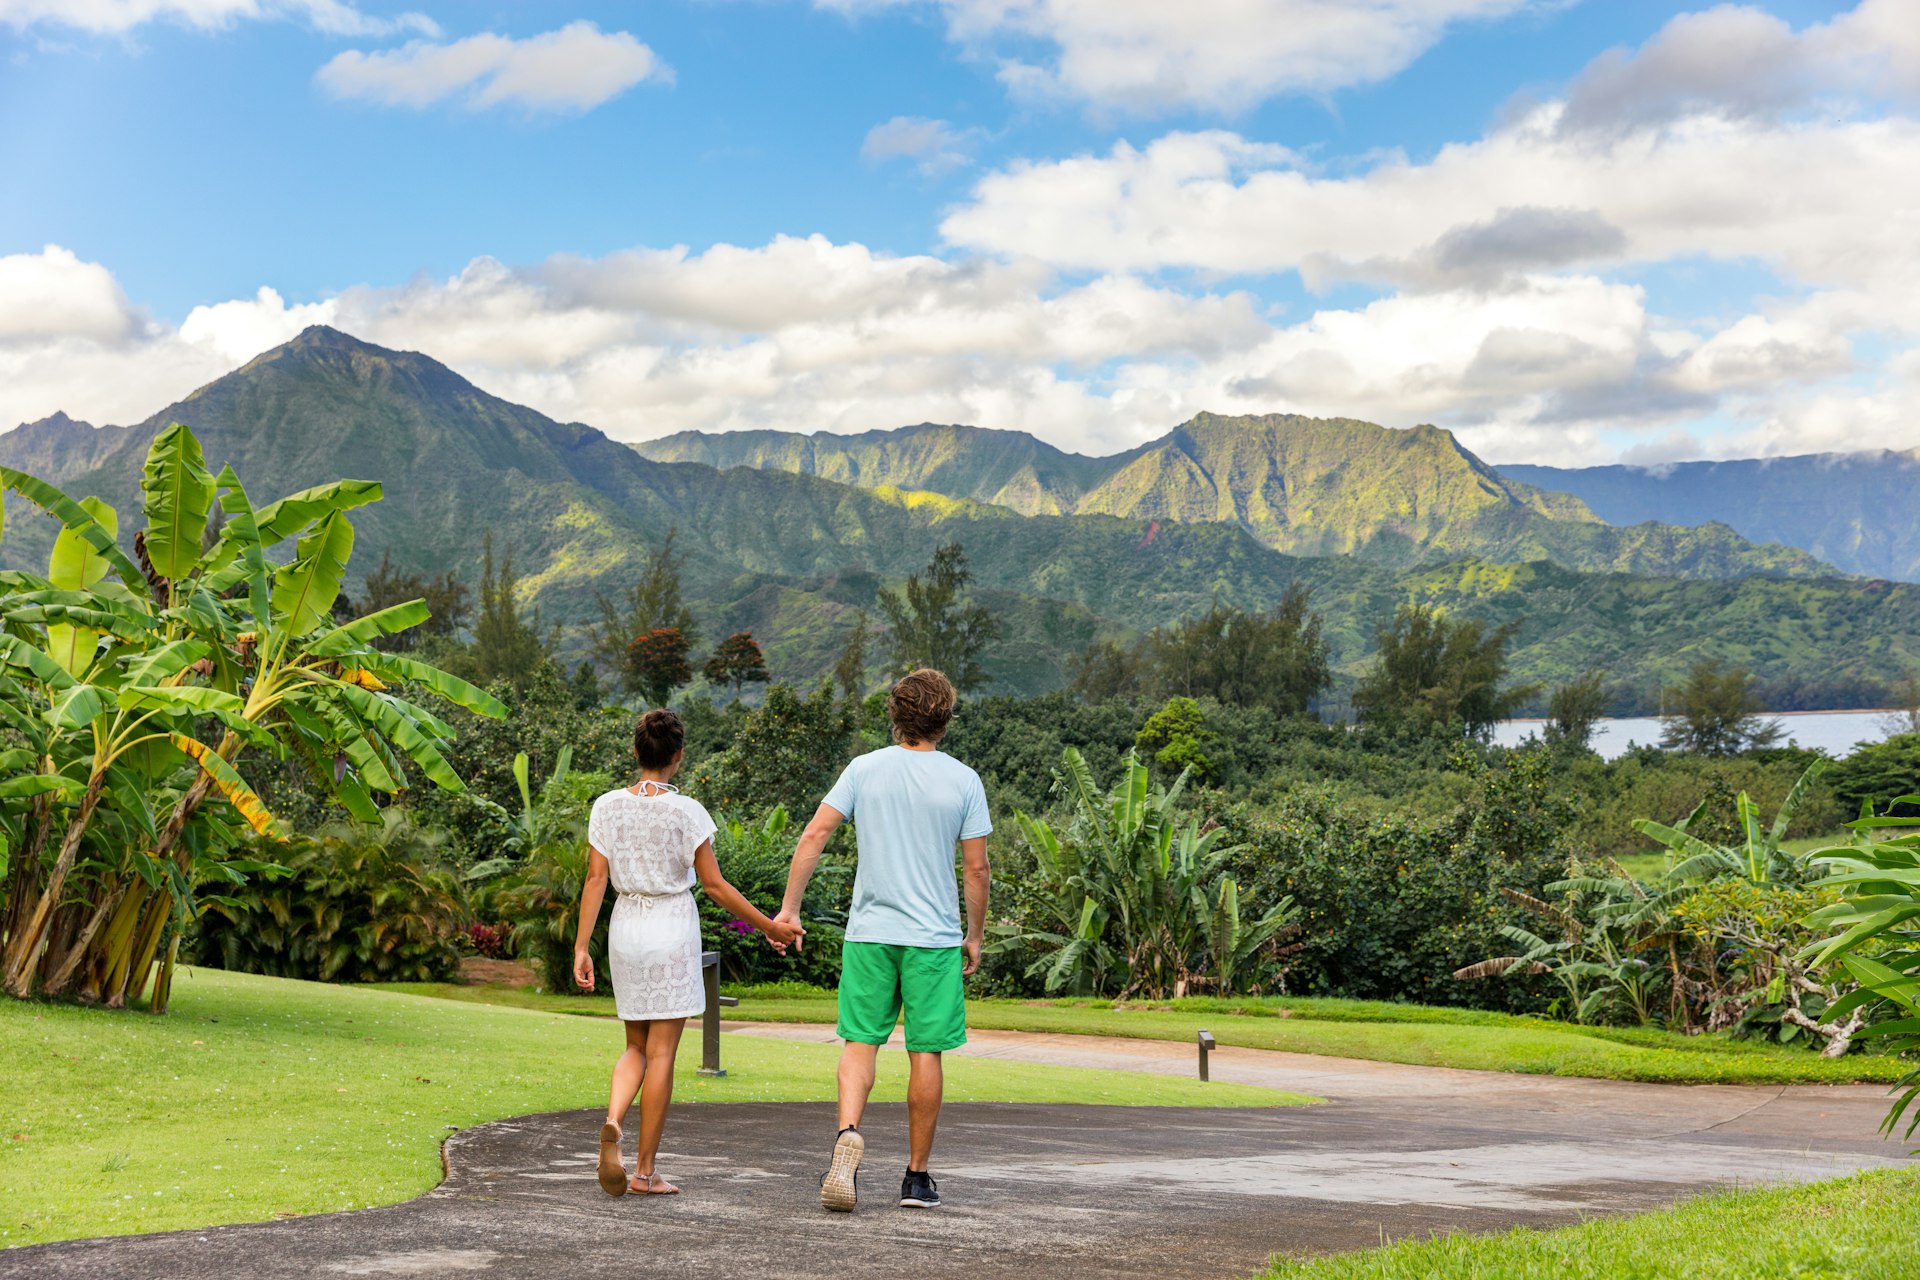 A couple walking along a paved pathway surrounded by lush trees, with mountains in the background